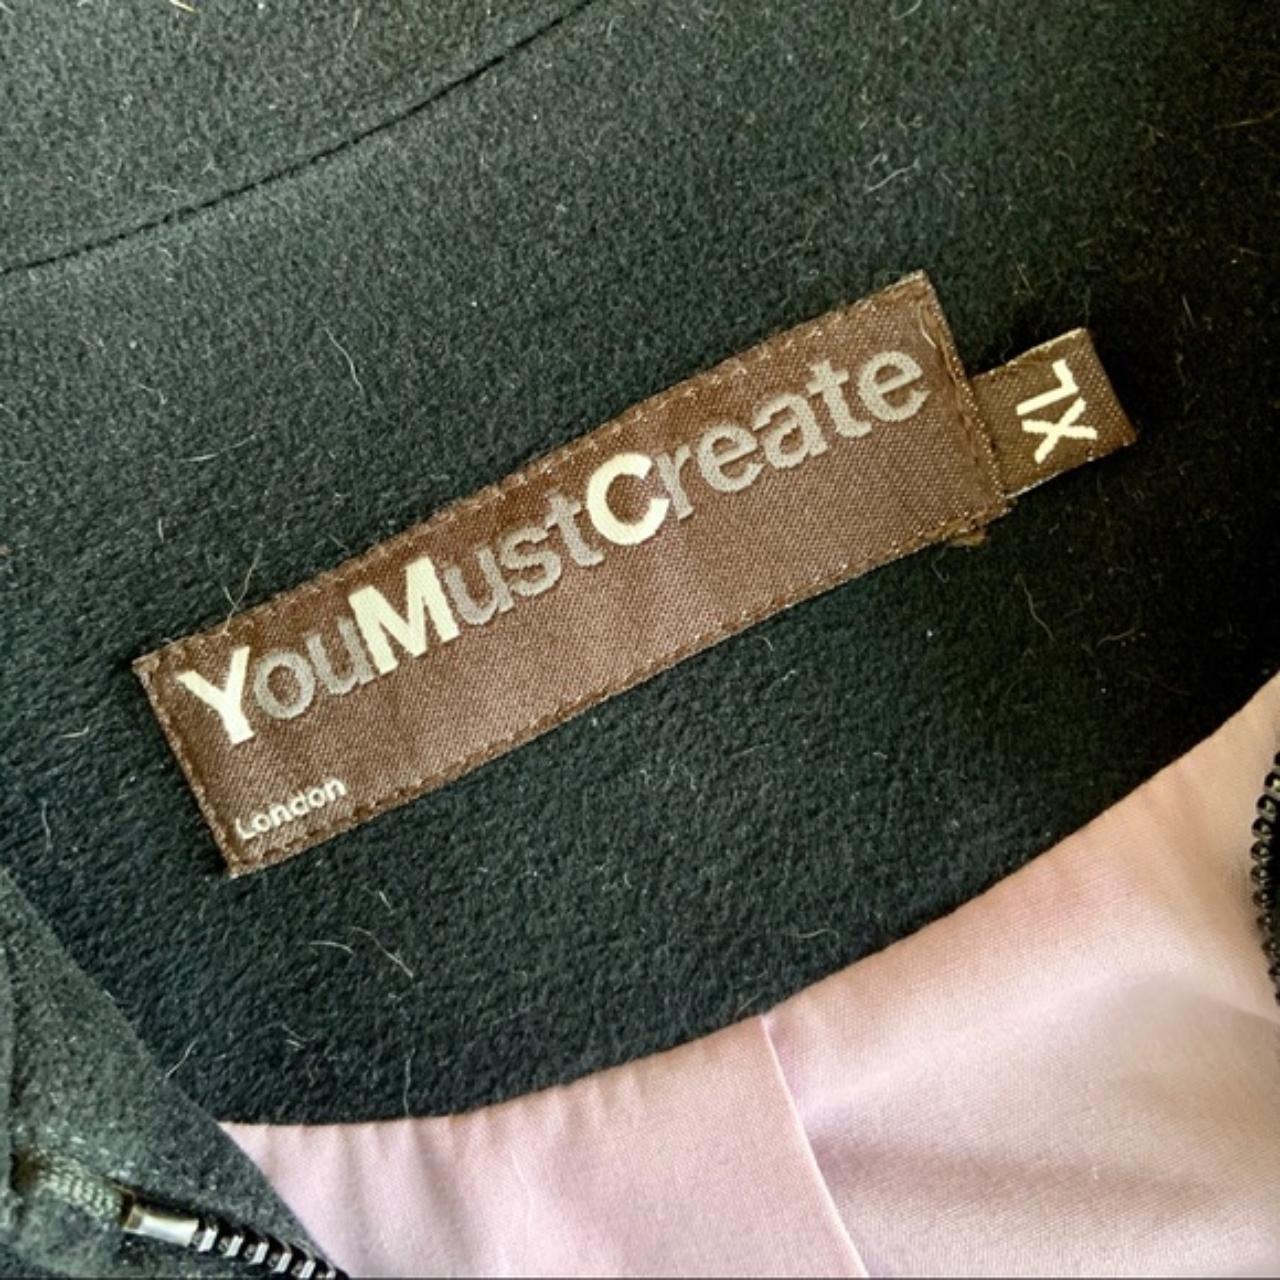 Product Image 2 - YMC cotton driving jacket. Very